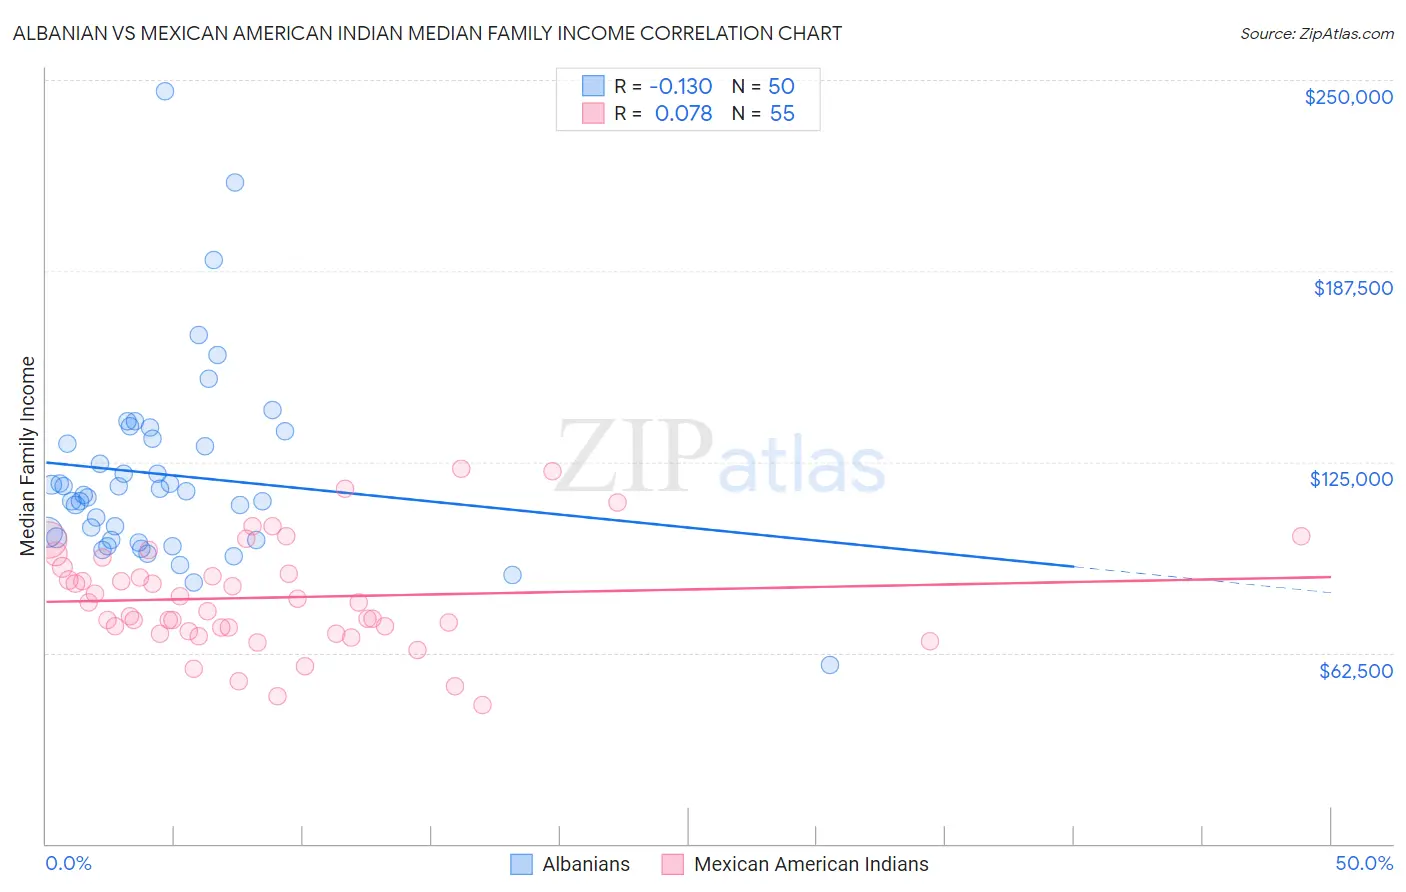 Albanian vs Mexican American Indian Median Family Income